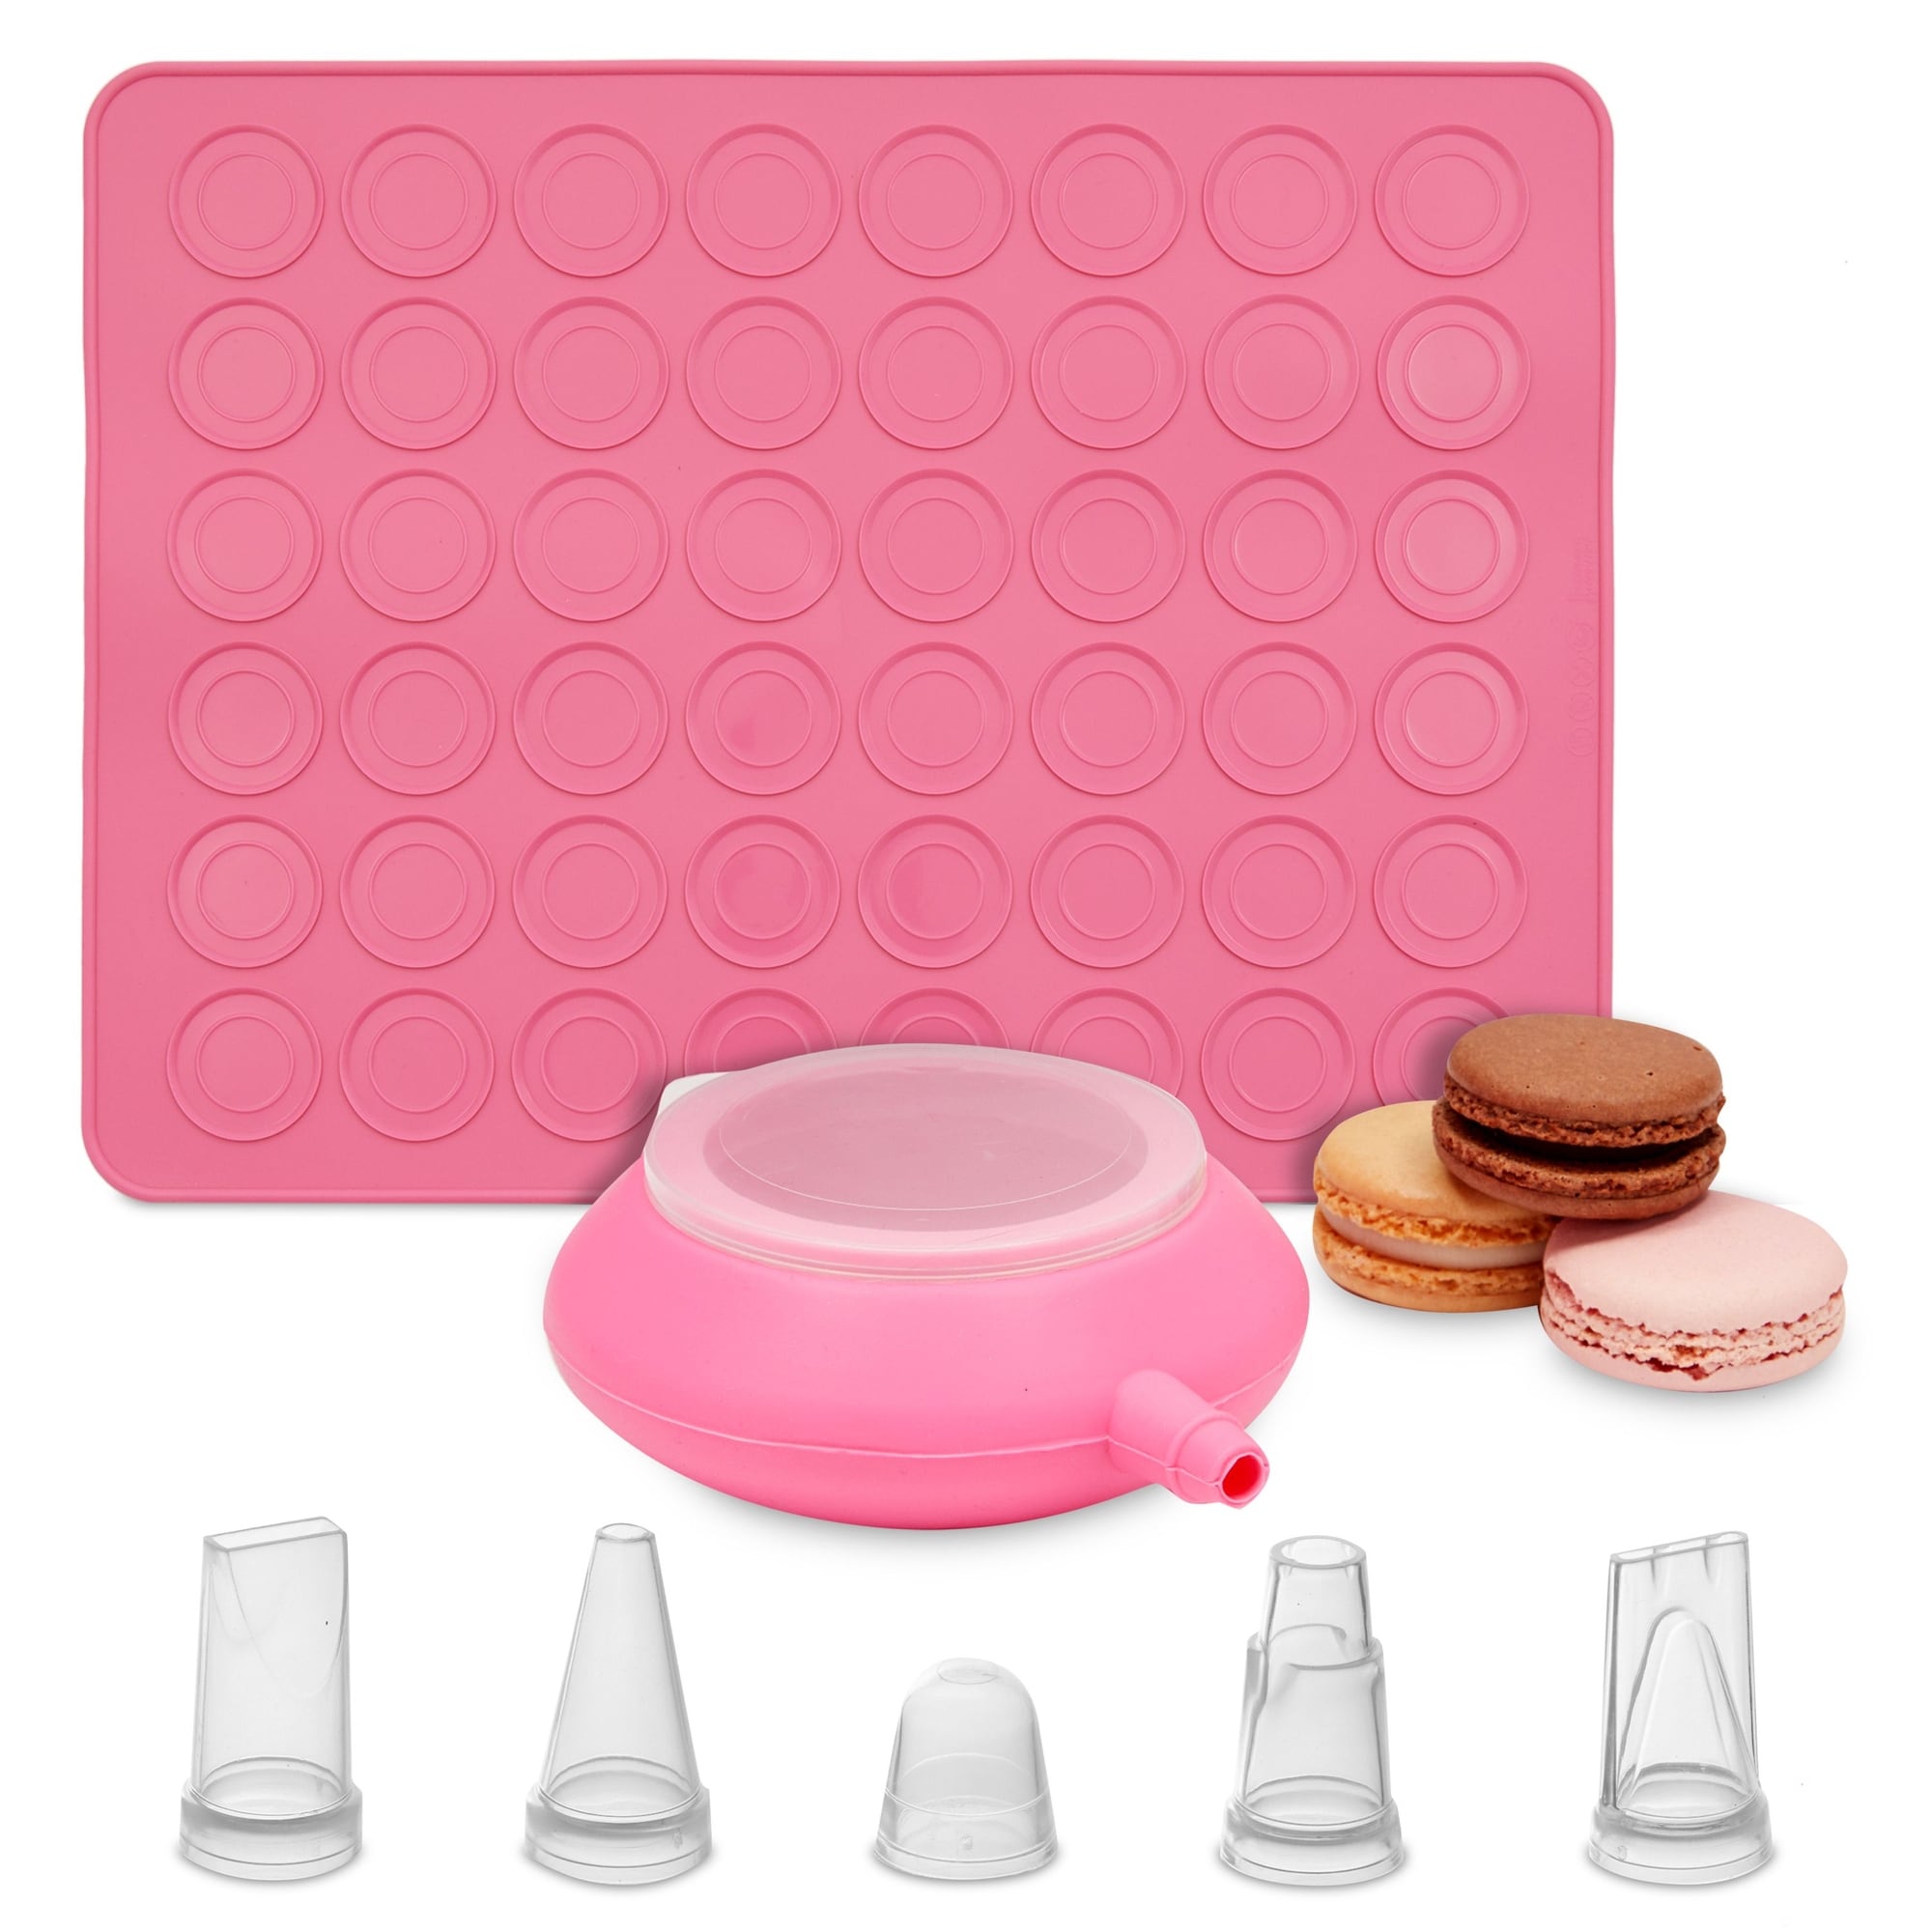 https://ak1.ostkcdn.com/images/products/is/images/direct/fcfa9d78bc5219fcb16ab5776bf4f6cc826c8498/Macaron-Baking-Kit-with-Pink-Silicone-Mat-Cookie-Sheet%2C-Piping-Pot%2C-5-Nozzle-Tips-%287-Piece-Set%29.jpg